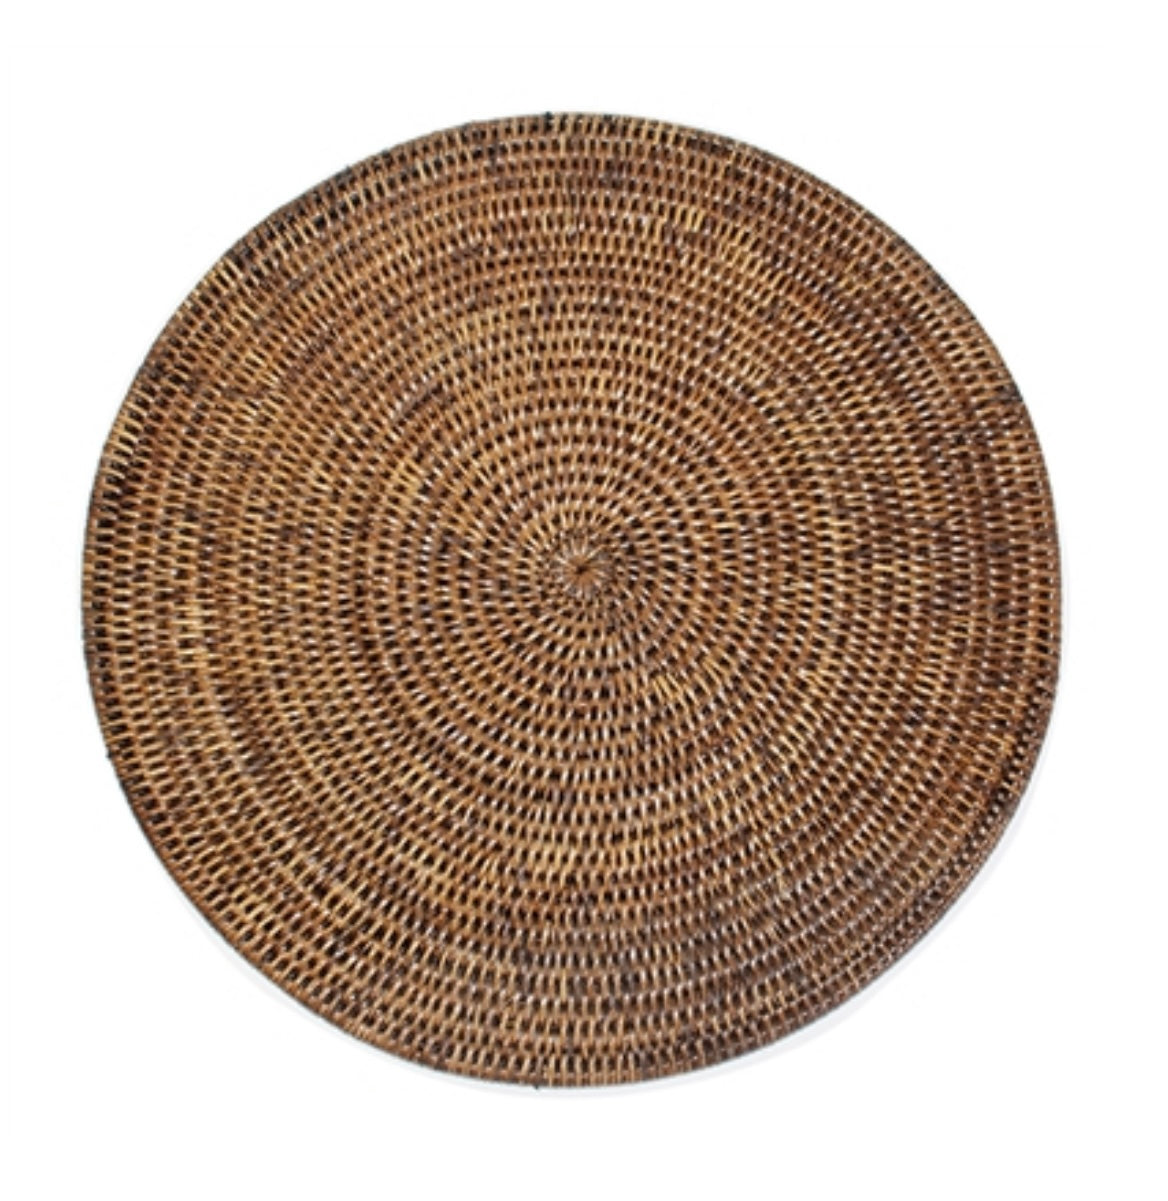 Hand Woven Round Rattan Placemat ~ set of 4